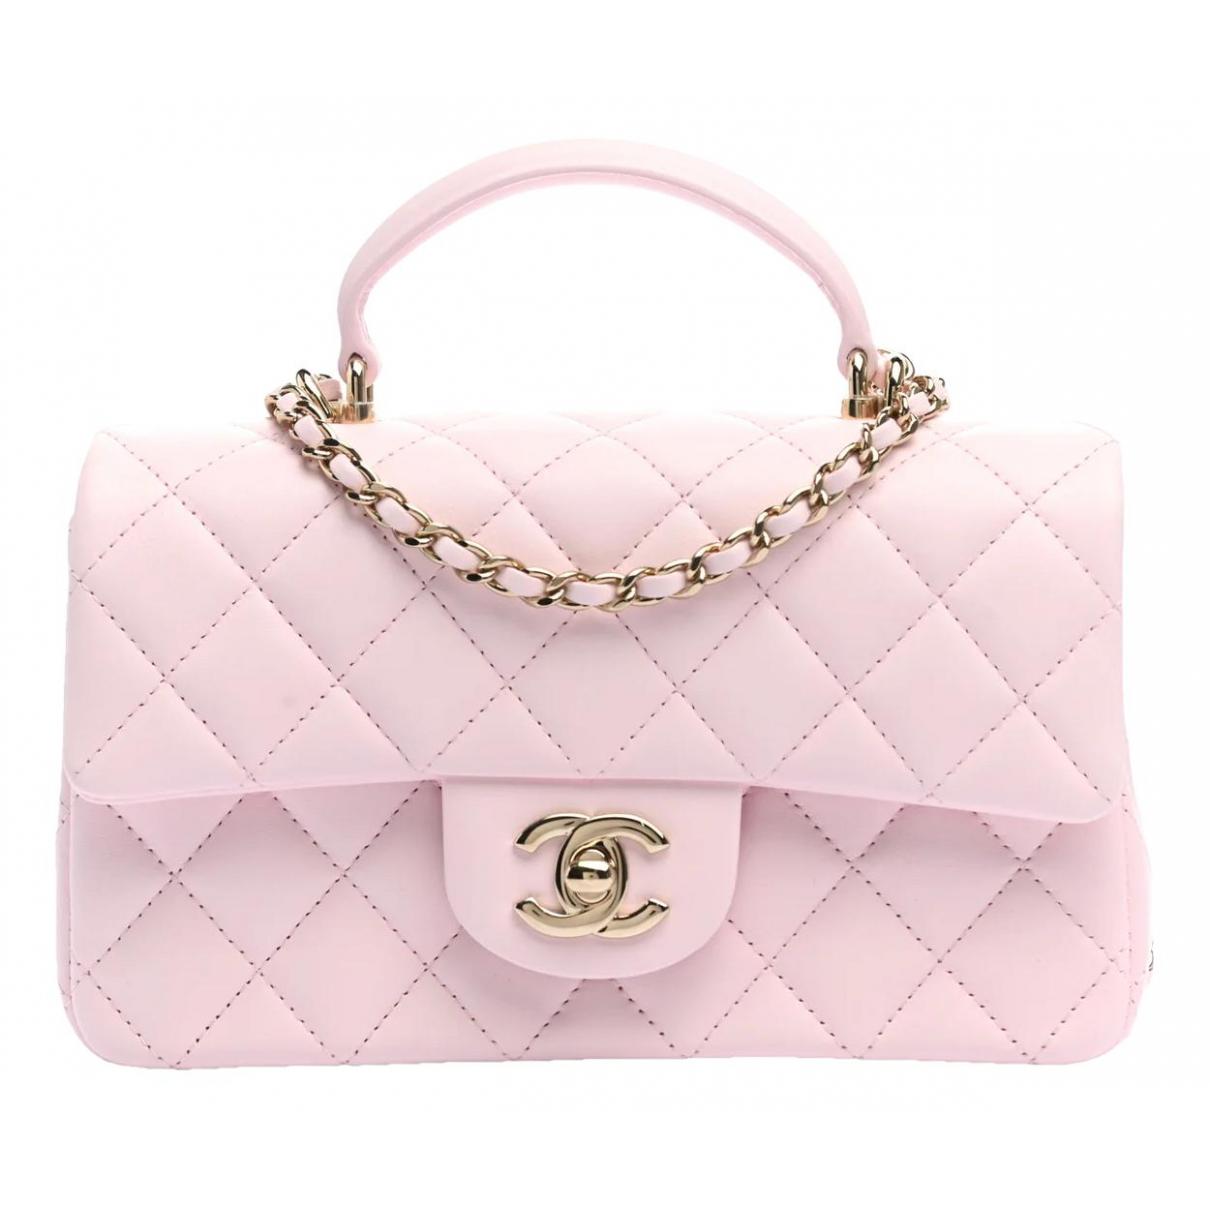 Timeless/classique leather crossbody bag Chanel Pink in Leather - 25499127